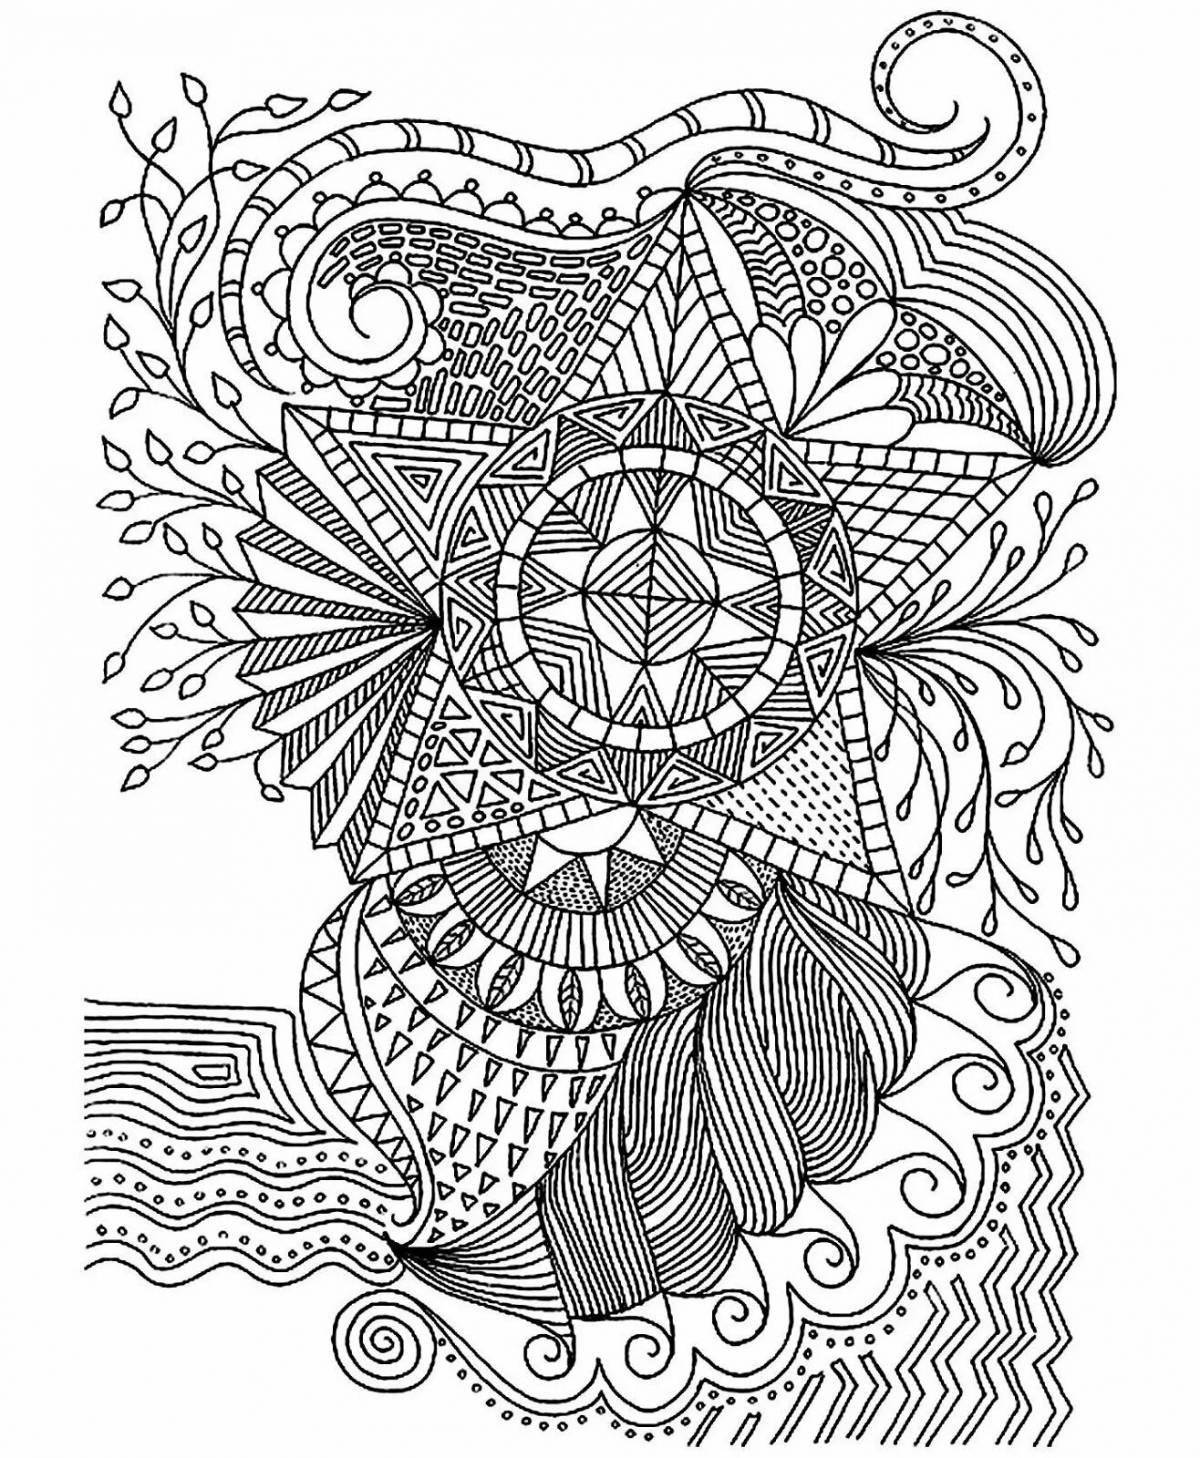 Coloring book harmony anti-stress art therapy